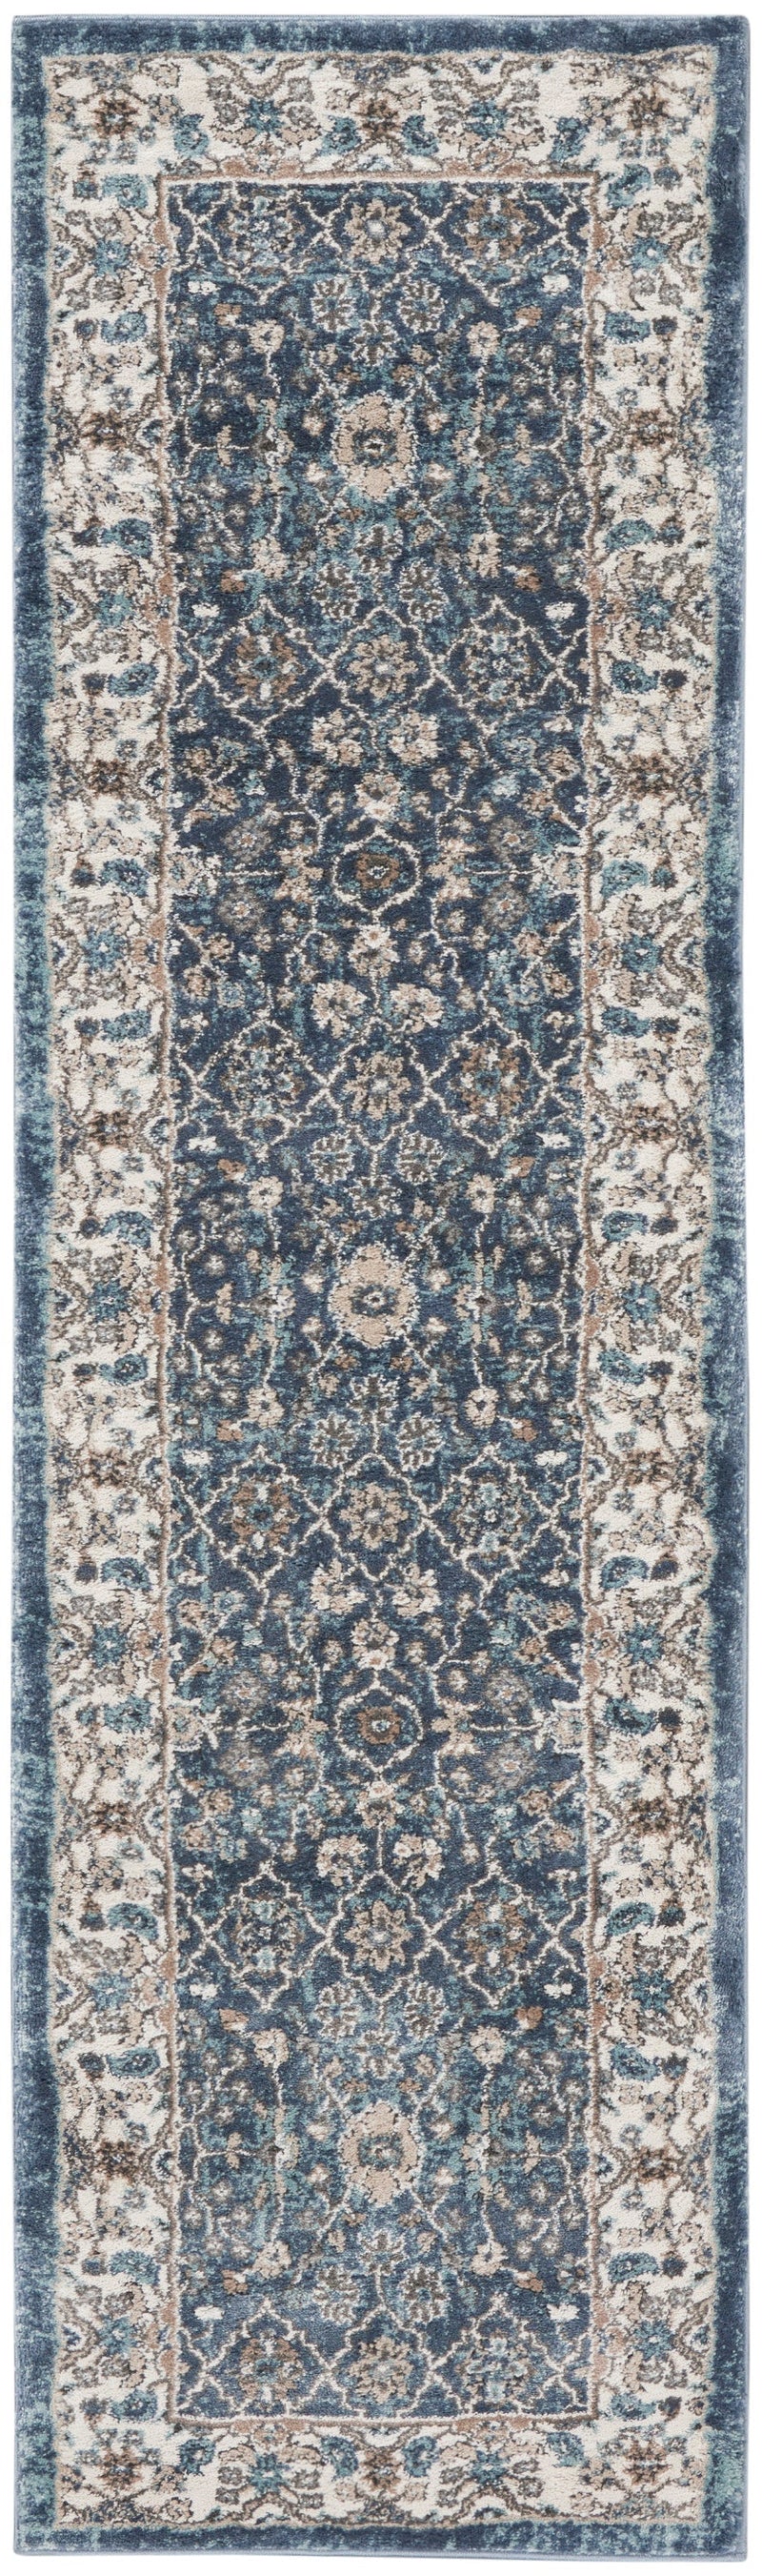 media image for american manor blue ivory rug by nourison 99446882905 redo 2 235